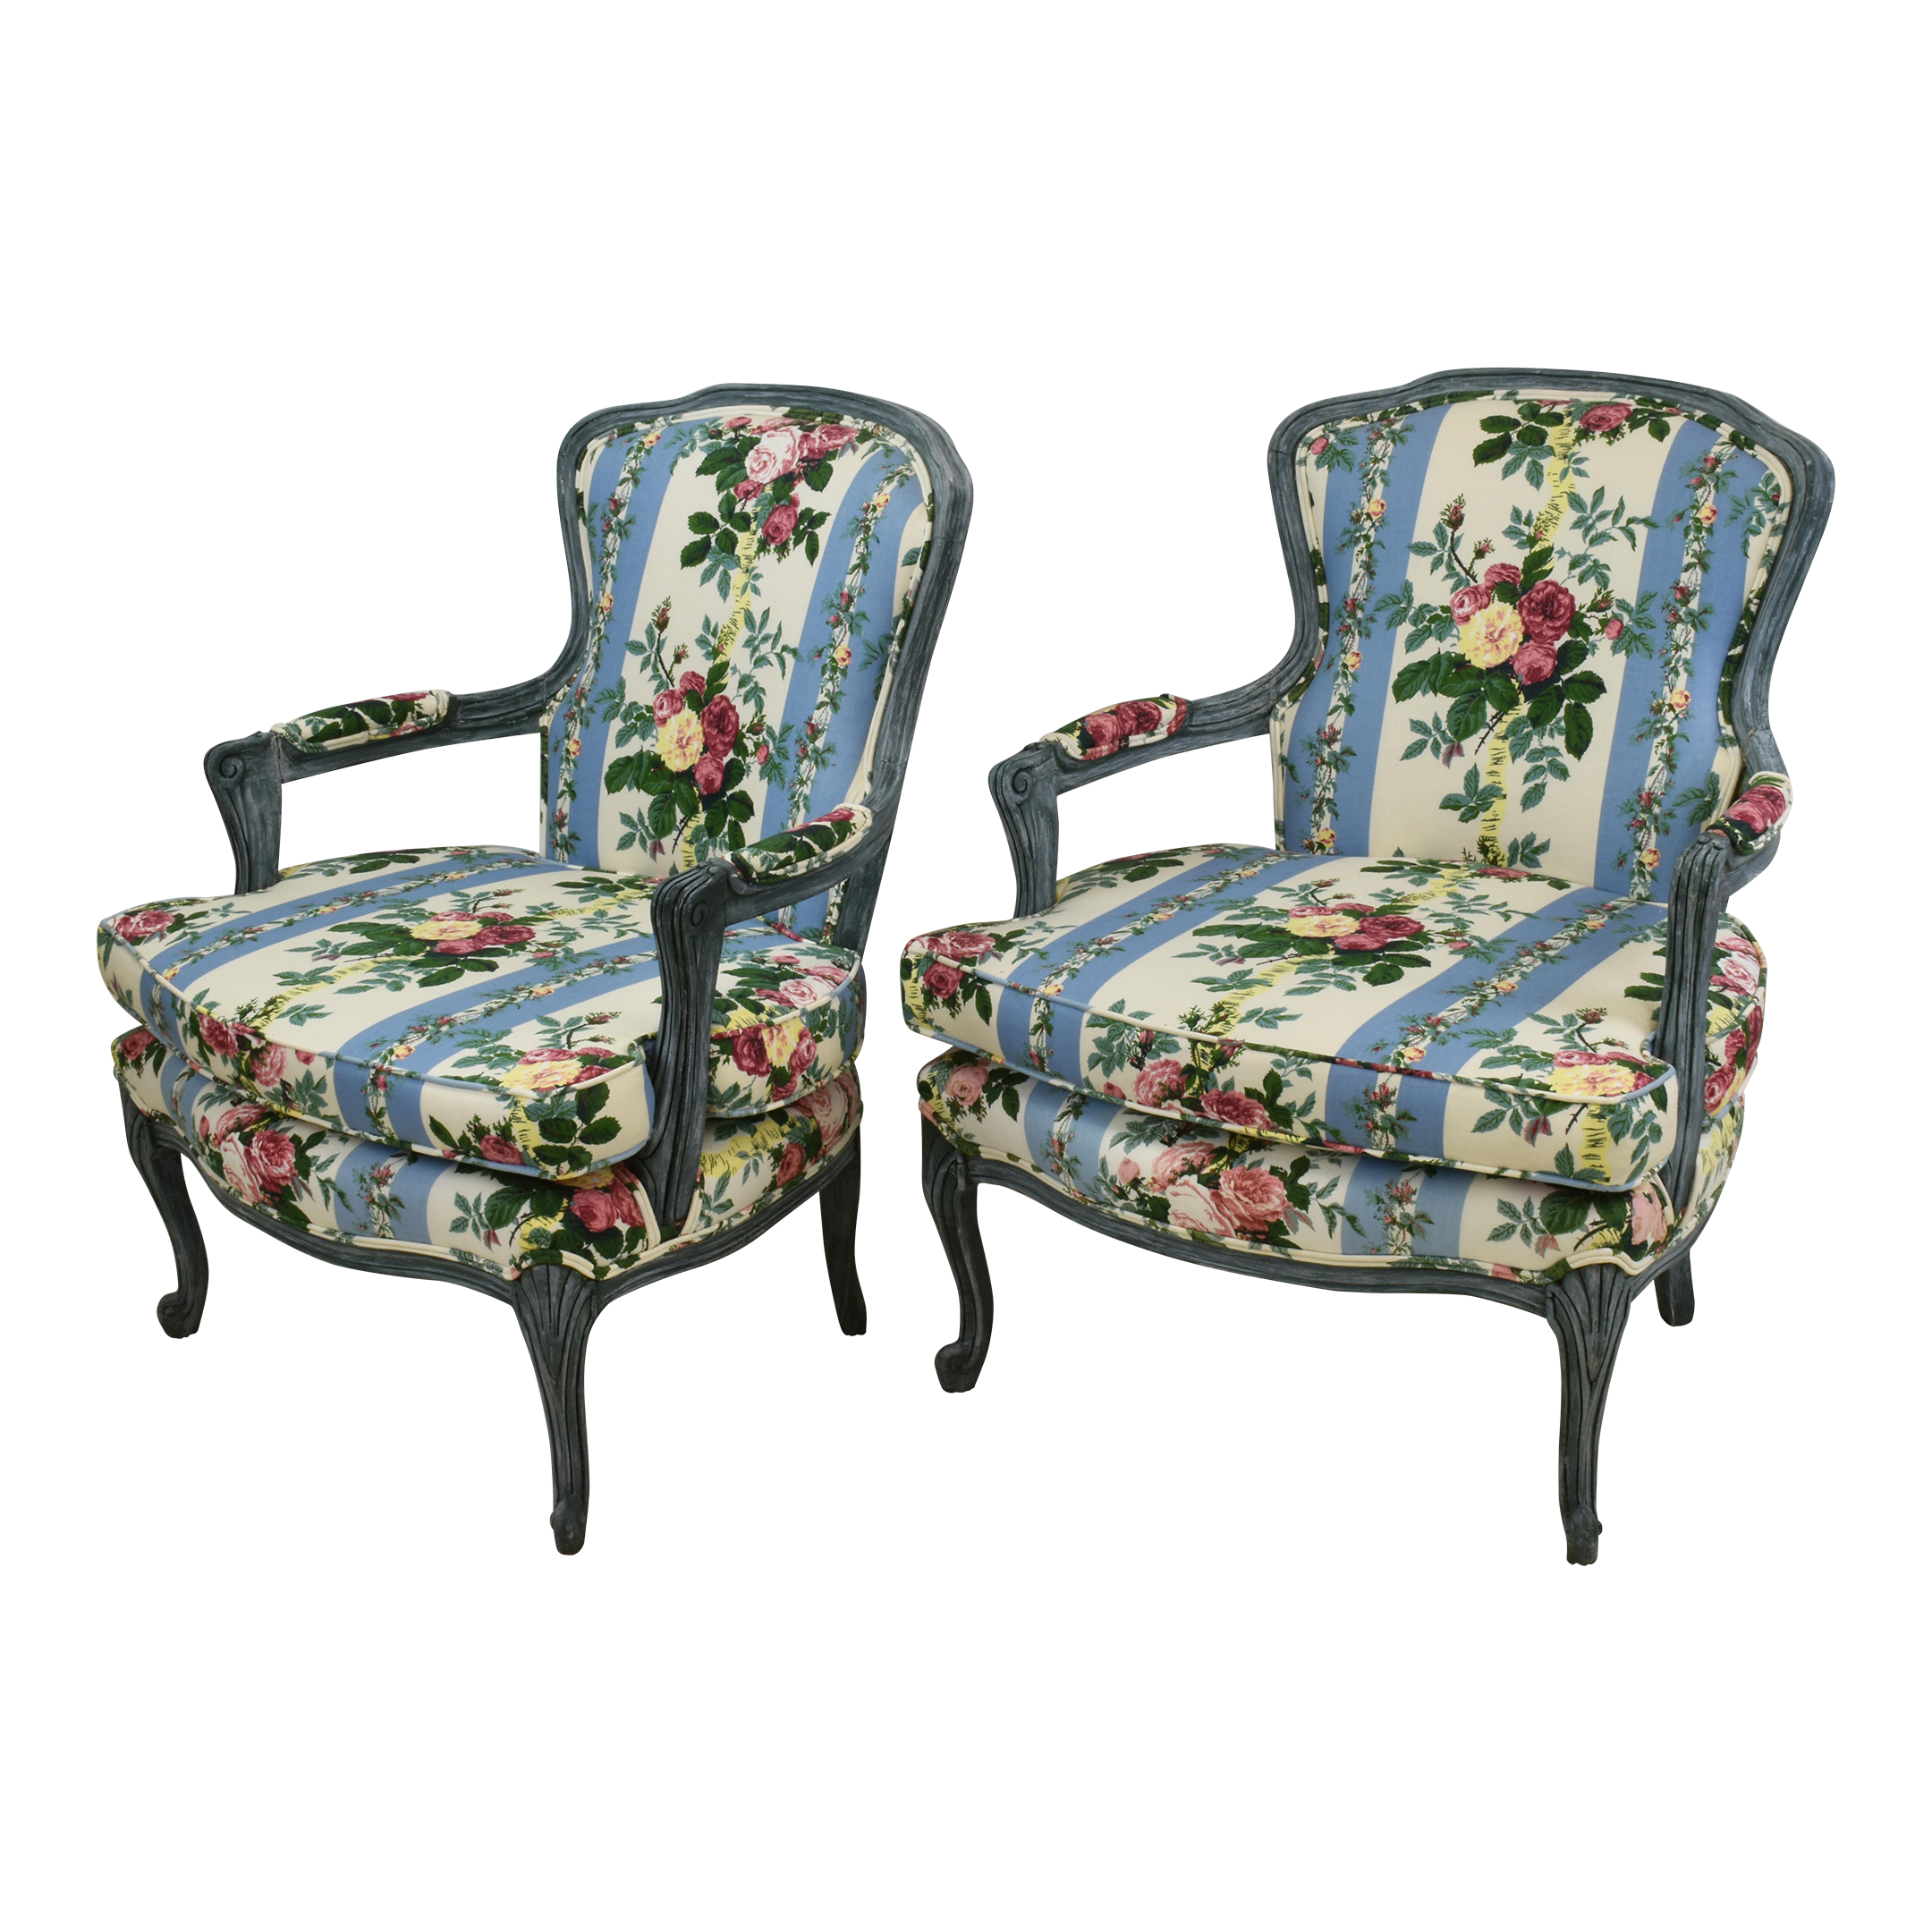 Vintage French Country Louis XV Style Armchairs Carved Details Floral Upholstery - a Pair